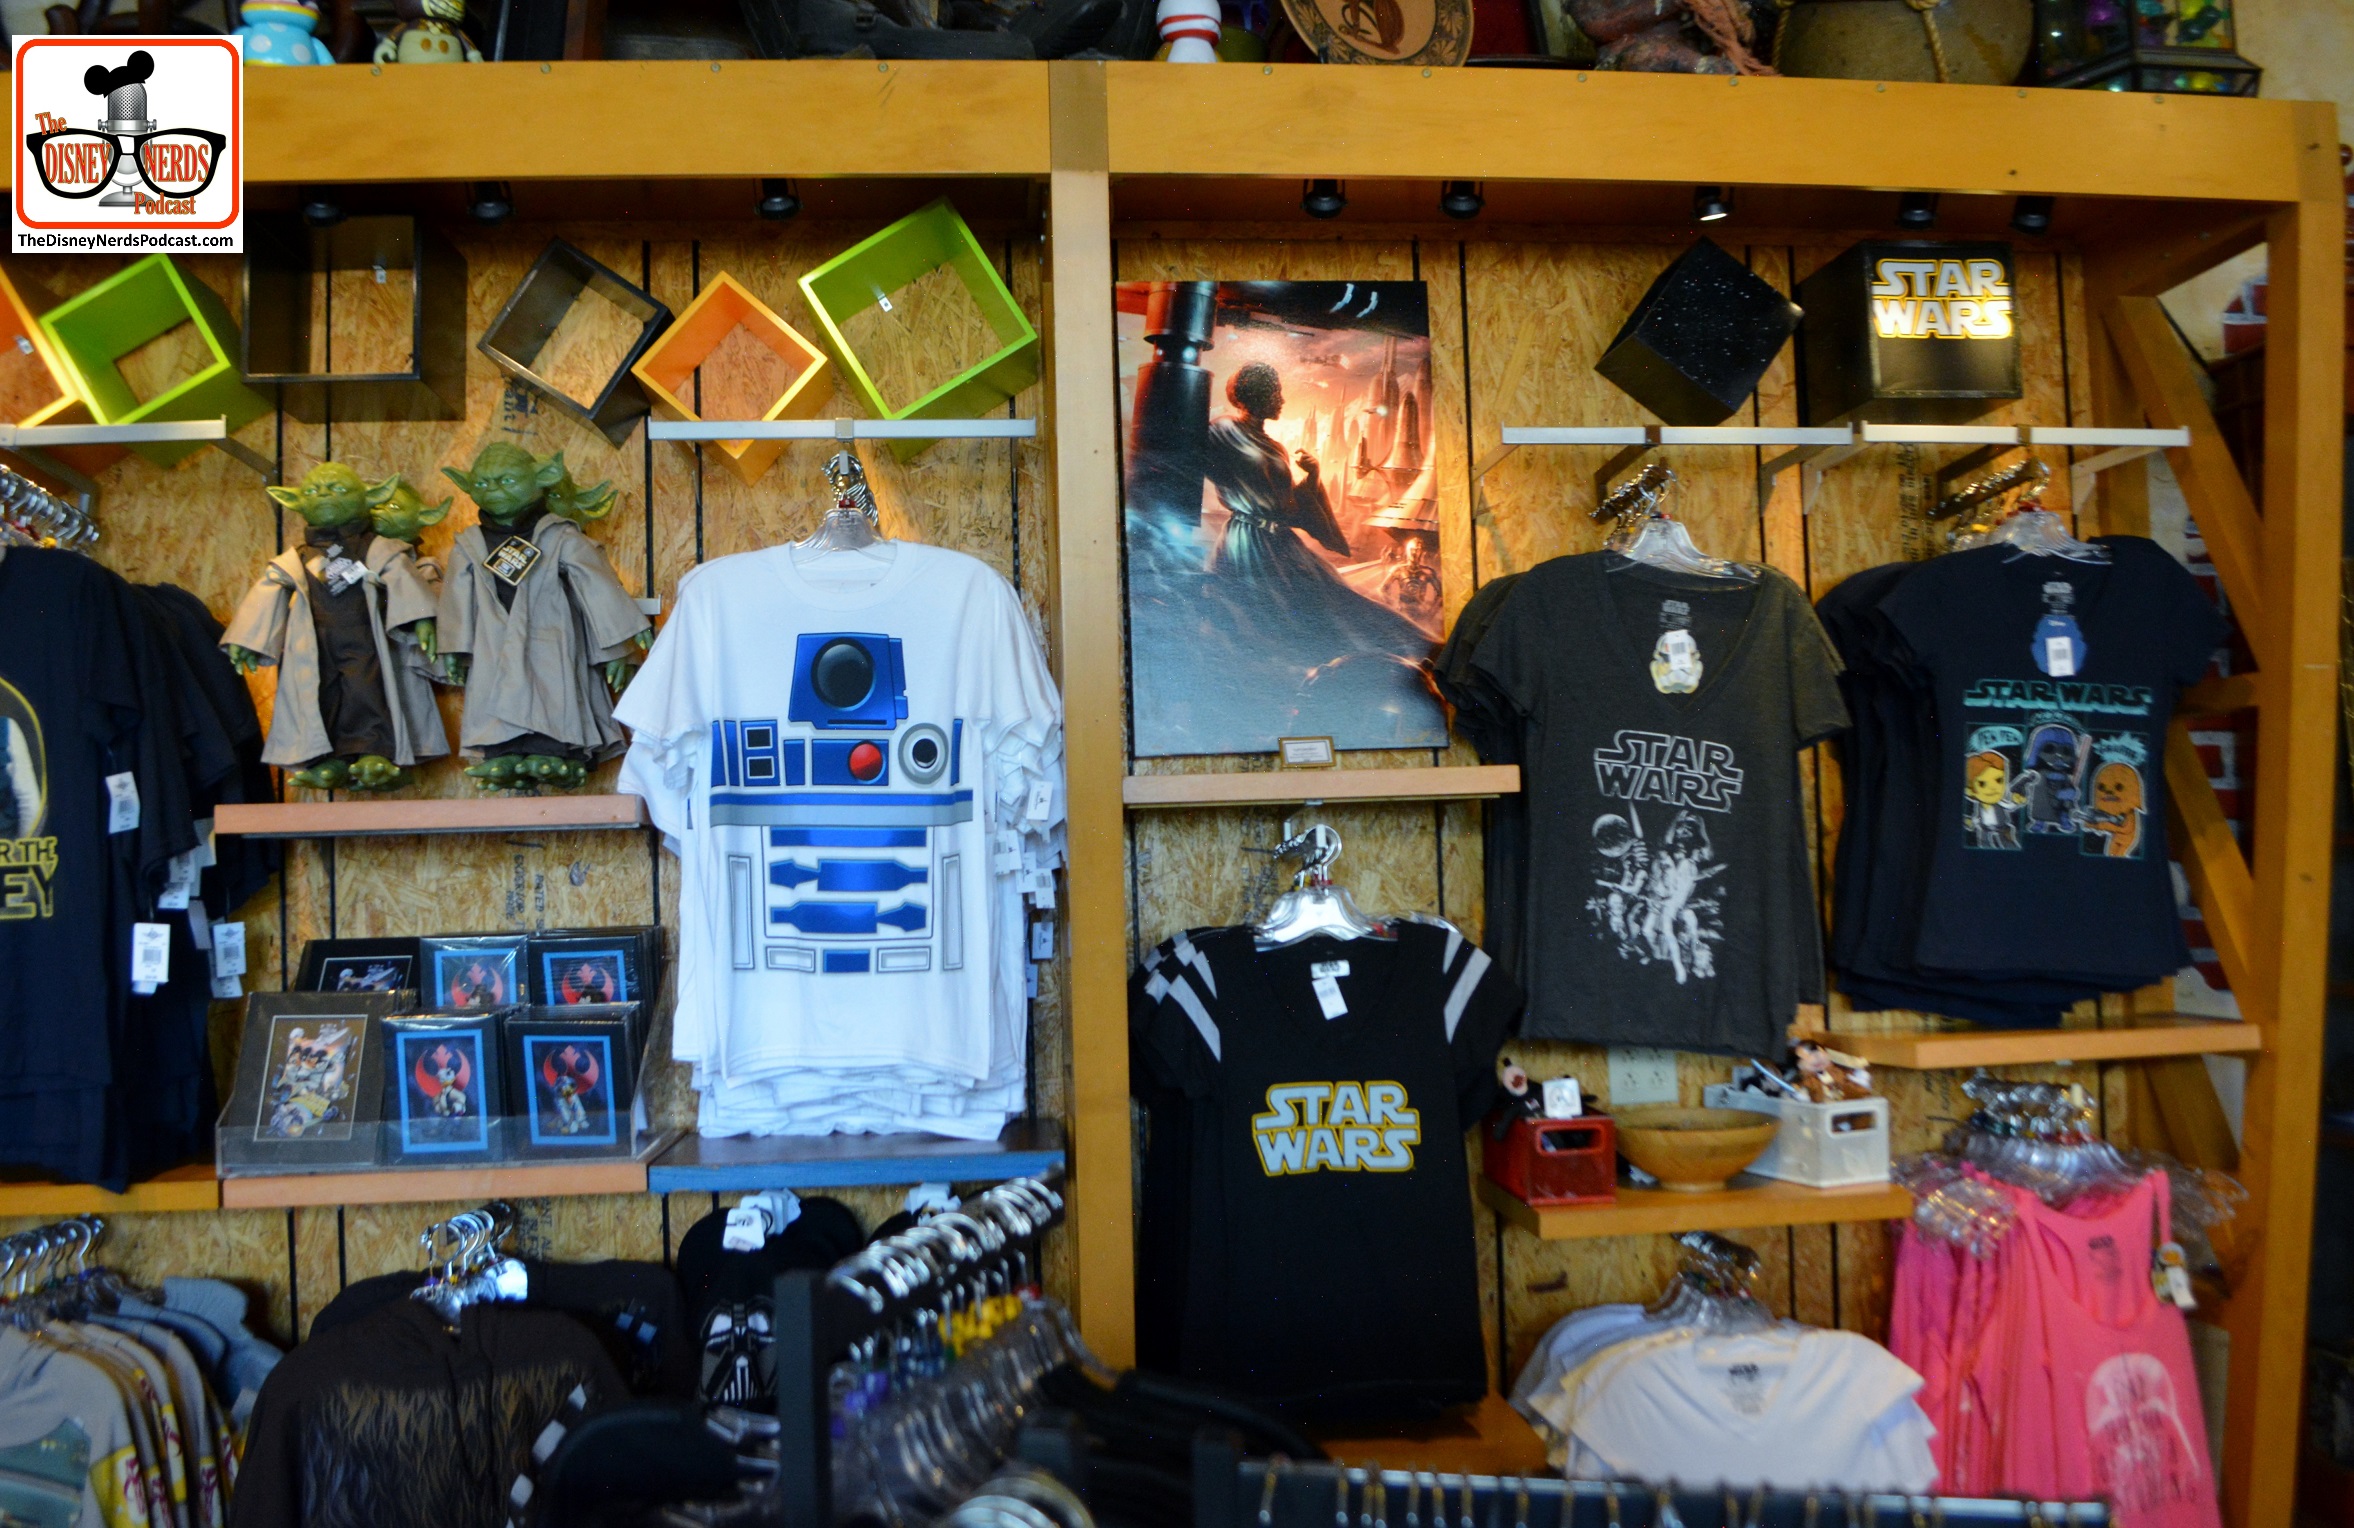 Disney Springs - D-Street has transformed into a Star Wars Store... but the sign on the door still says D-Street